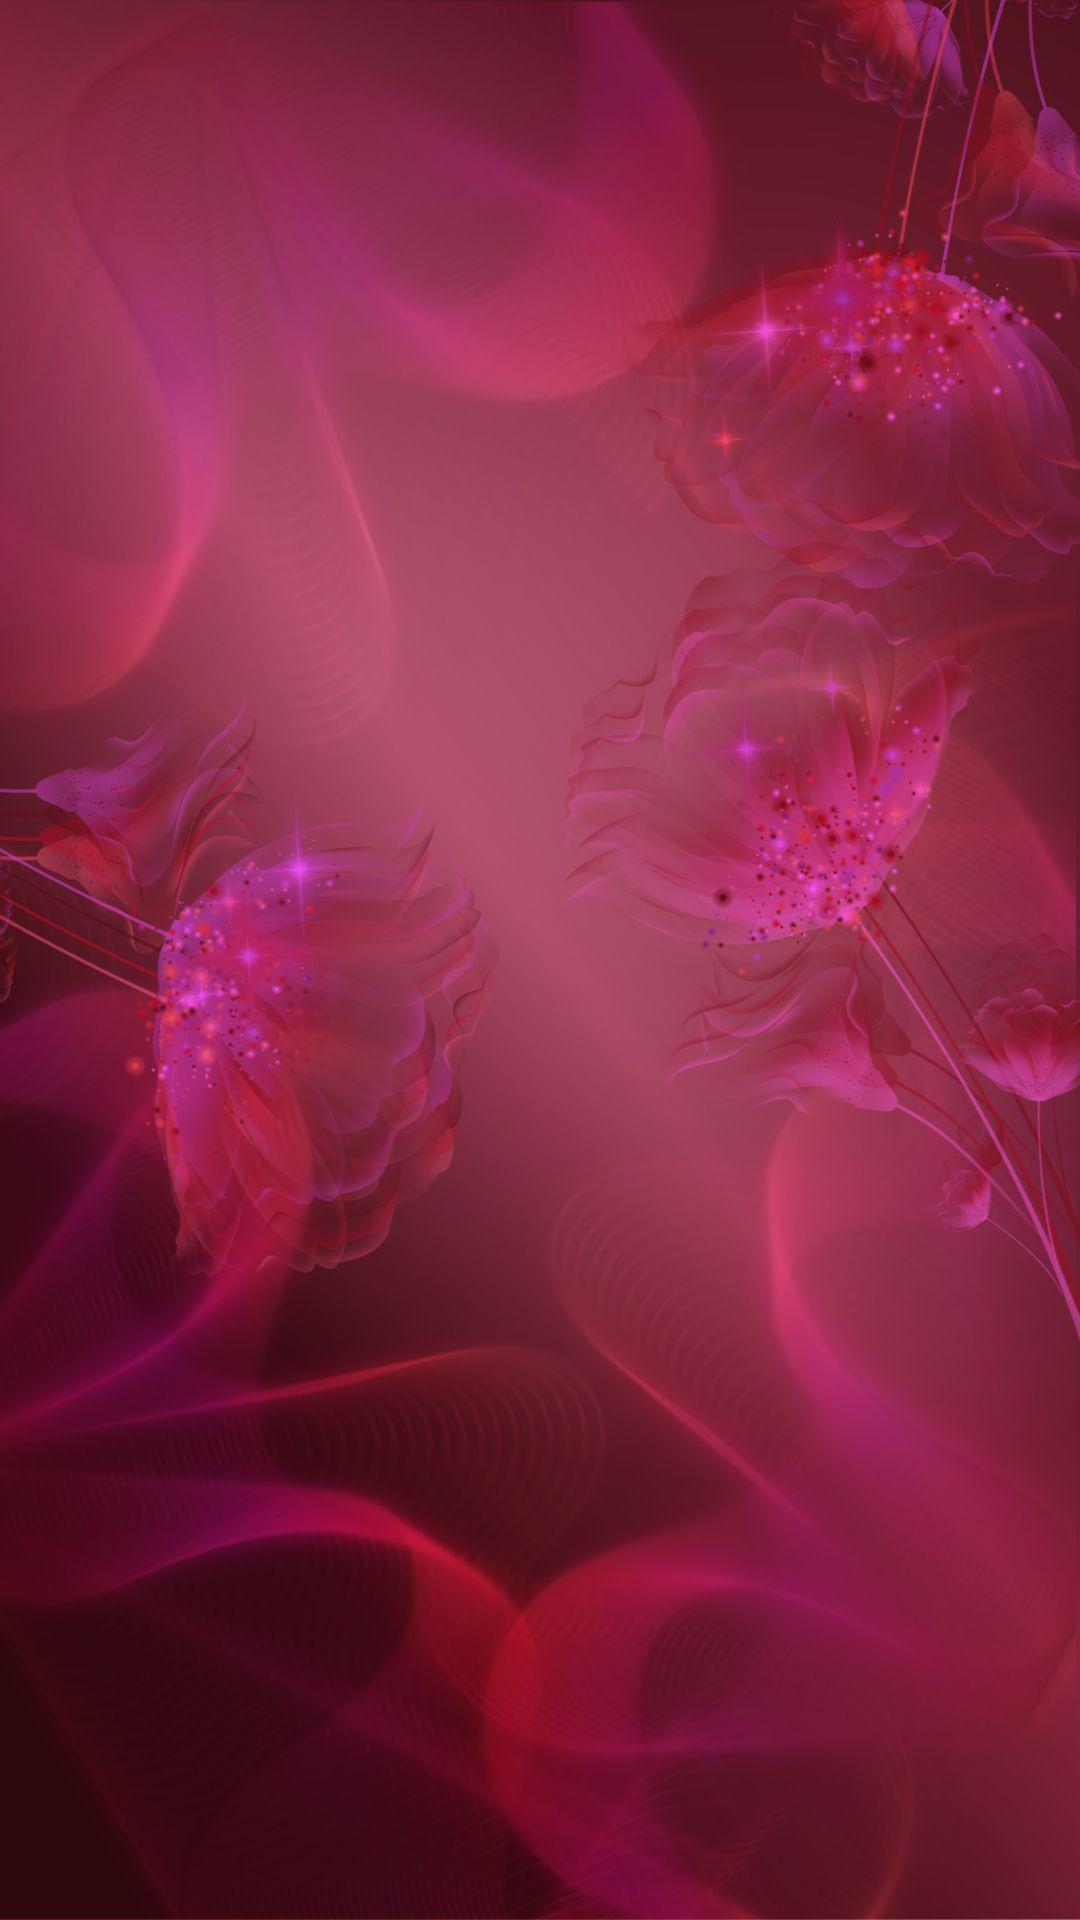 Psychedelic Wallpaper/ Background With Glowing Flowers On Pink Red